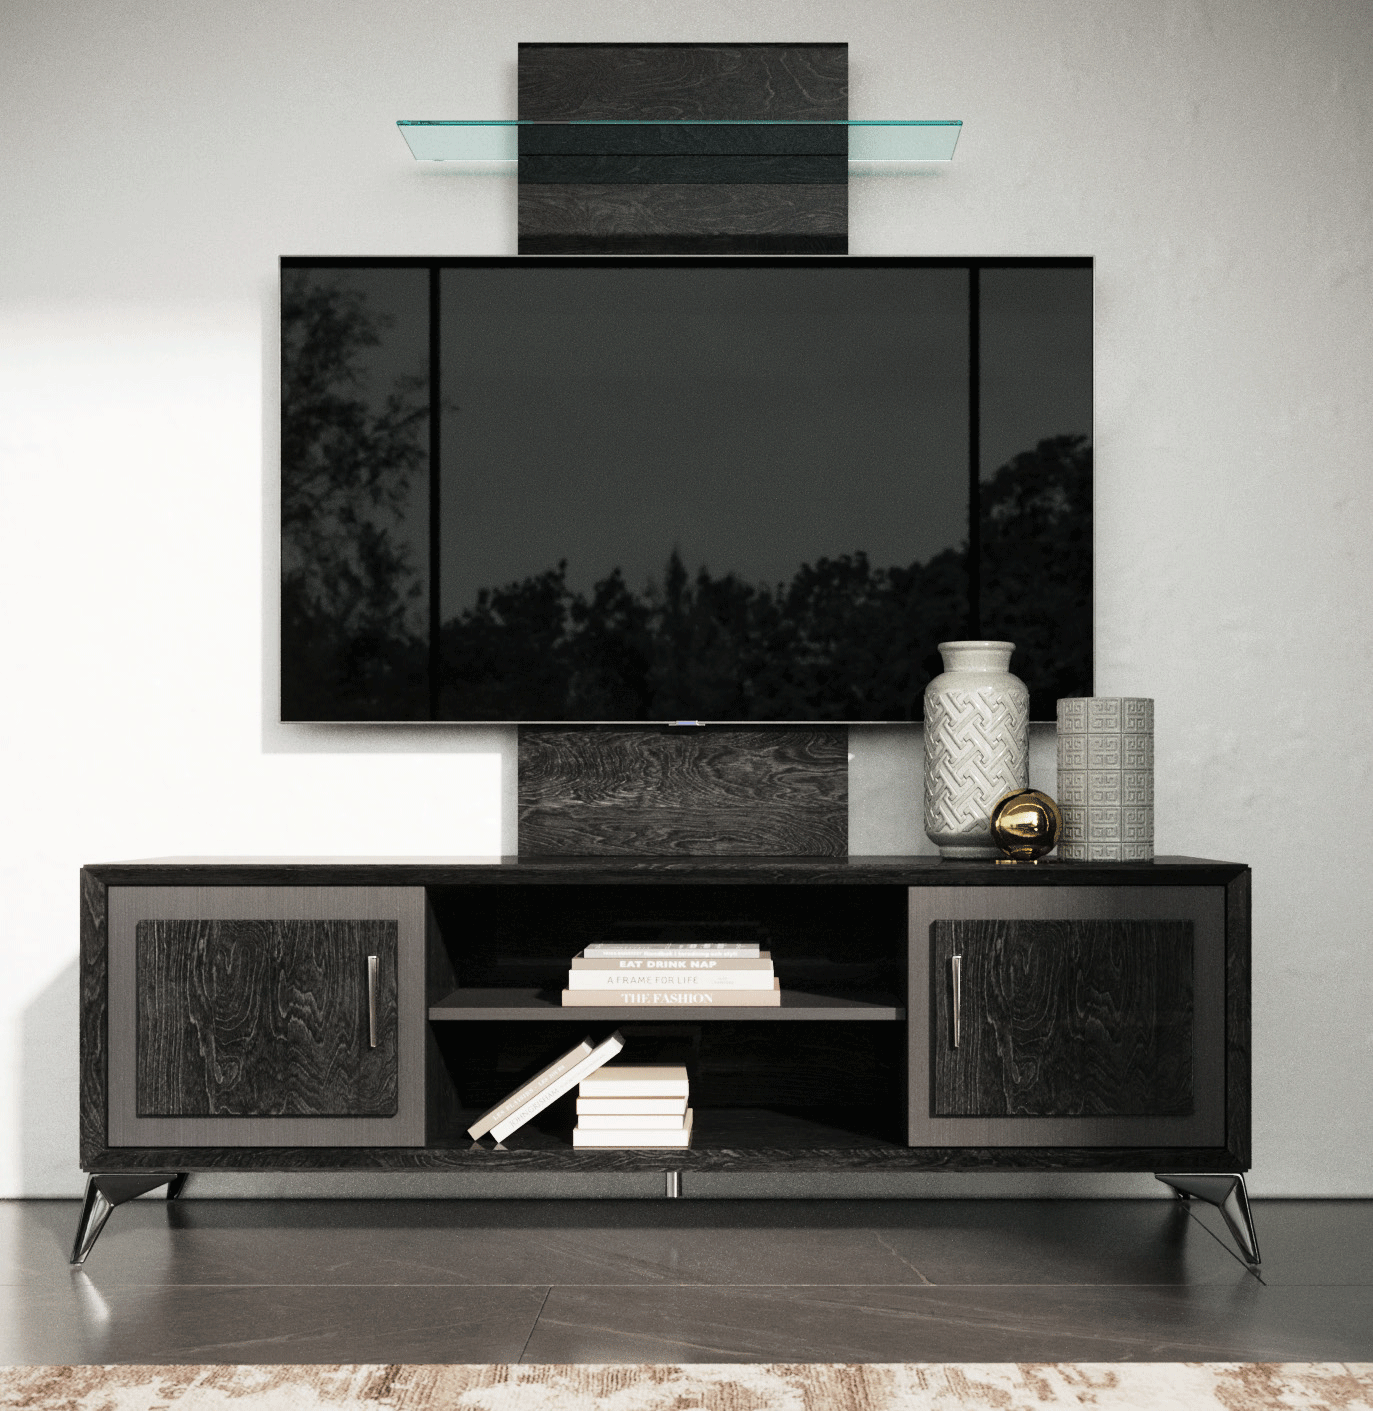 Wallunits Hallway Console tables and Mirrors Krystal TV Cabinet + Wall Panel w/ Led light